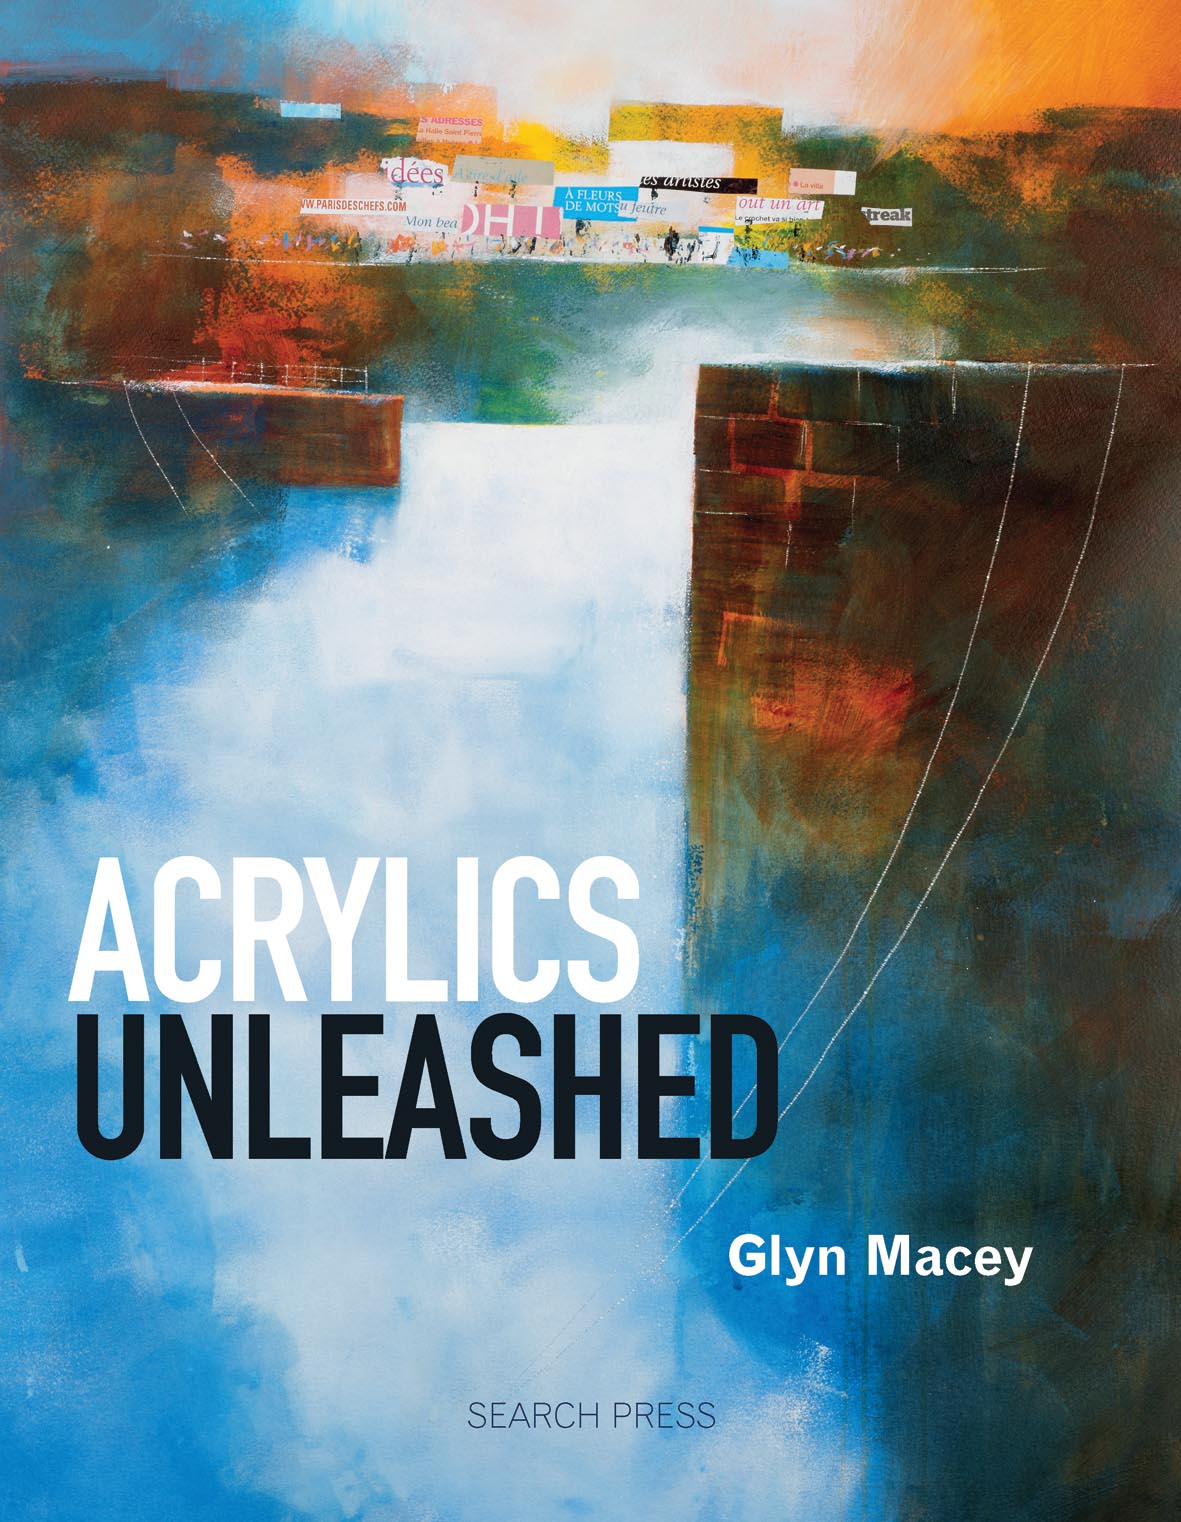 Search Press Books - Acrylics Unleashed